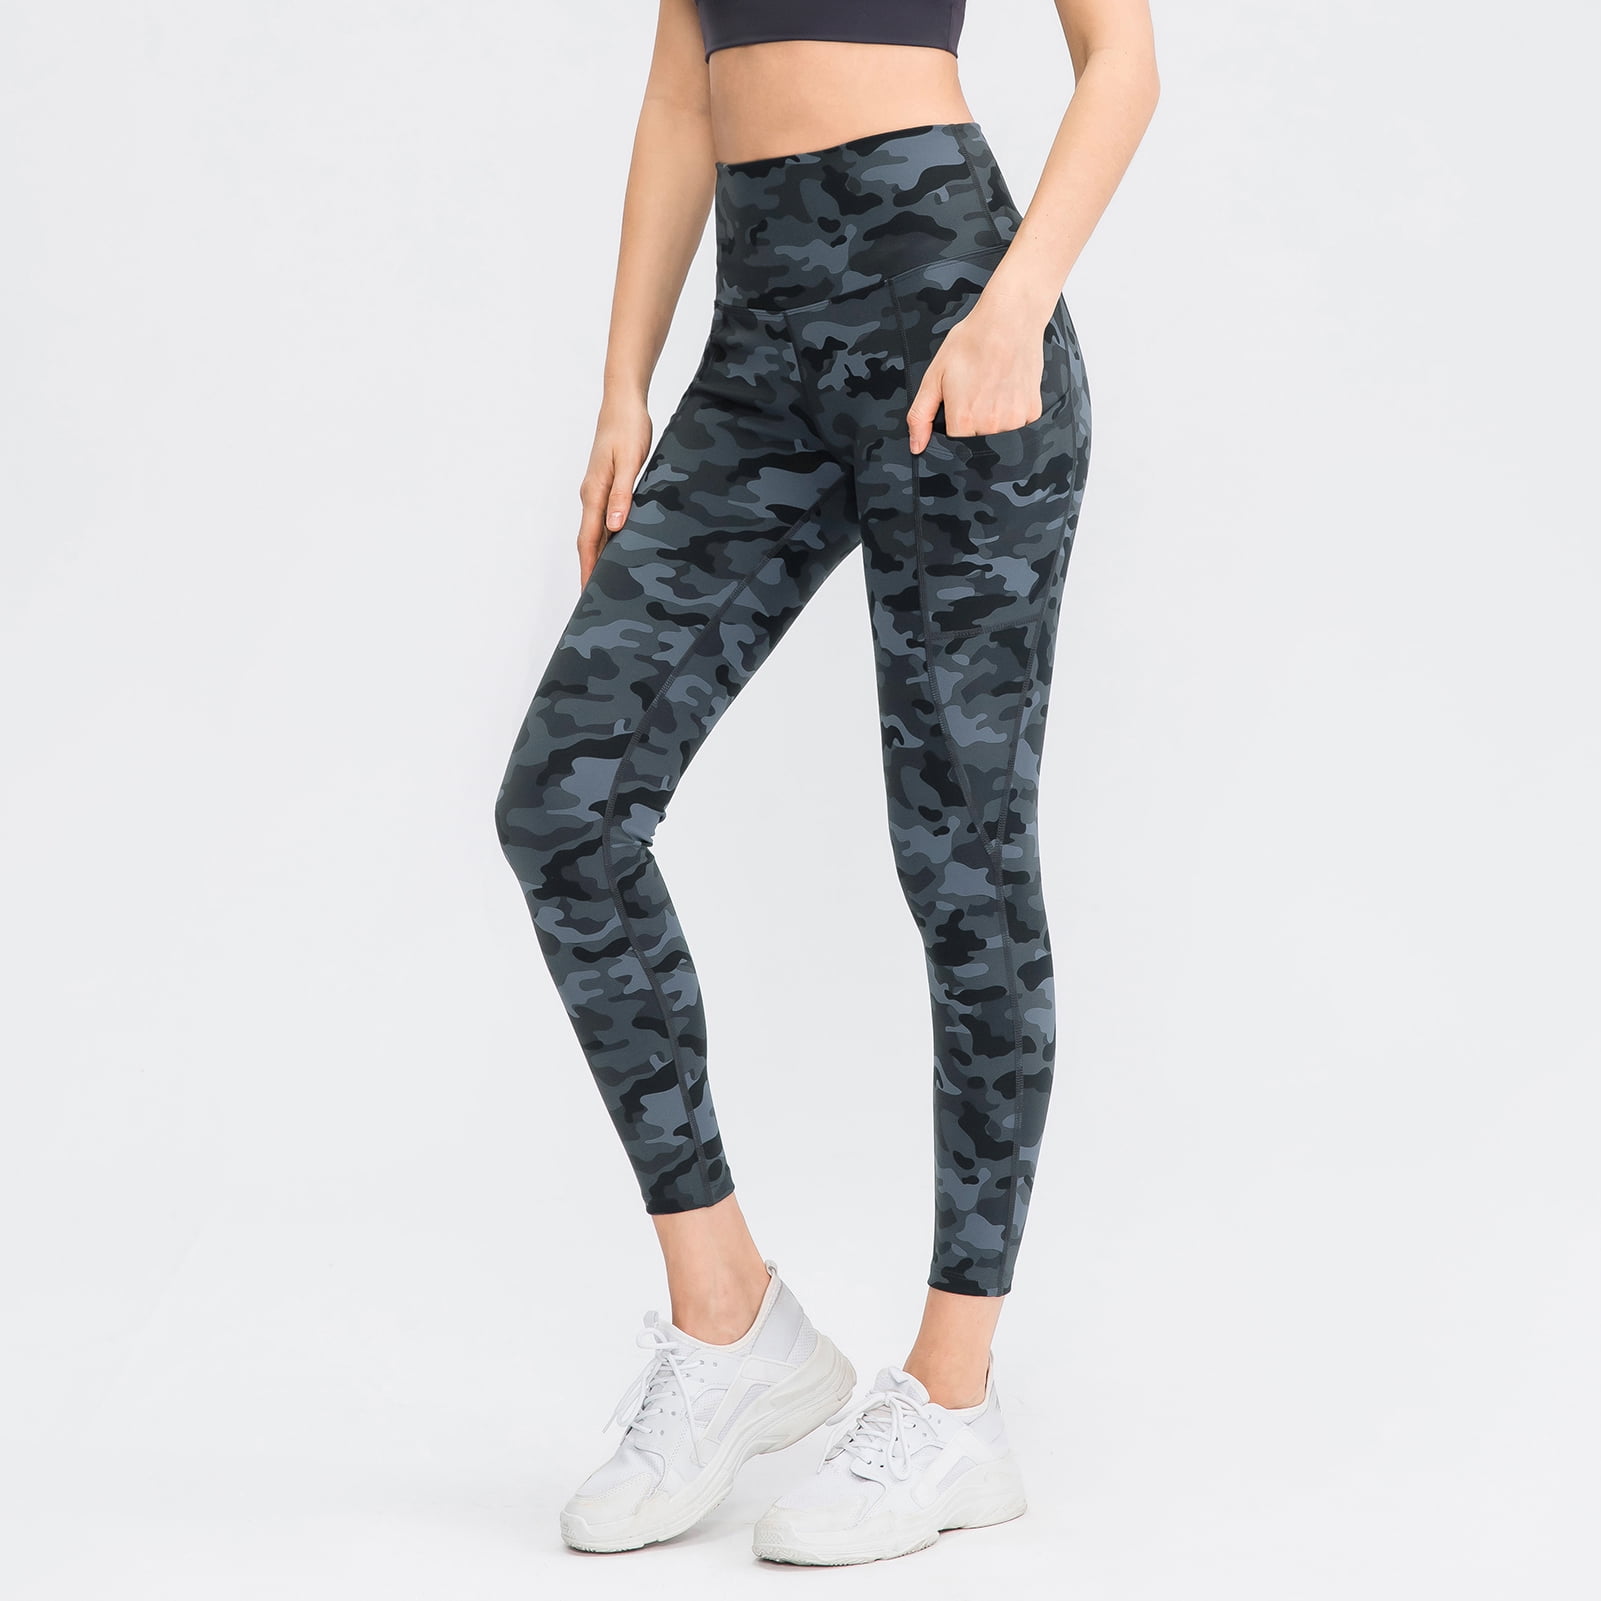 Womens Camouflage Yoga Leggings High Waisted Fitness Sport Running Gym Pants New 